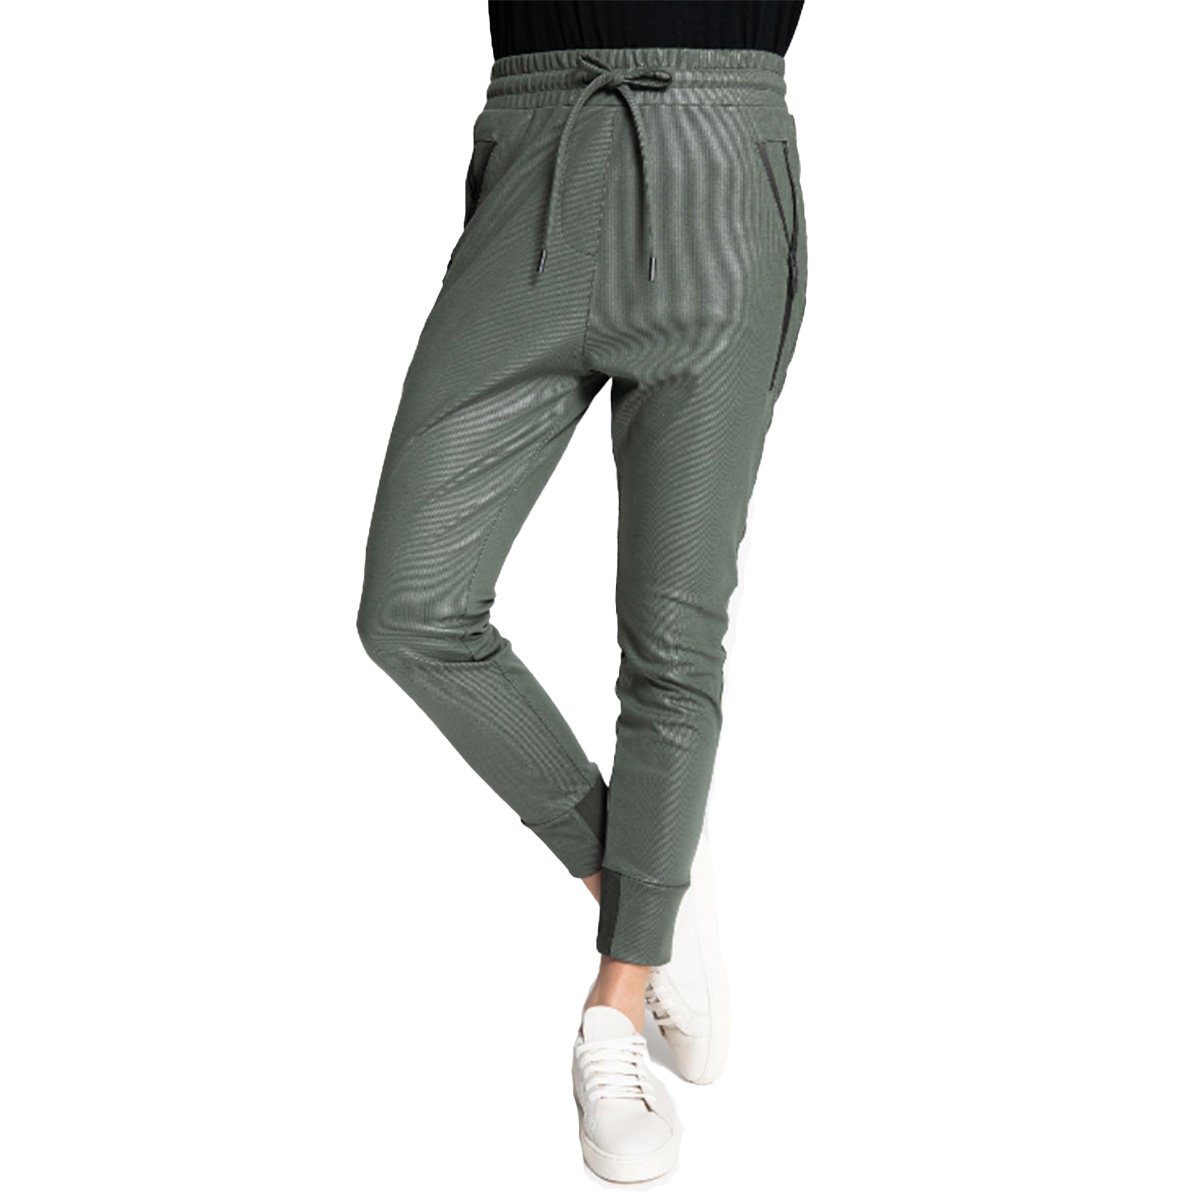 Pants Fabia olive Zhrill Jogger